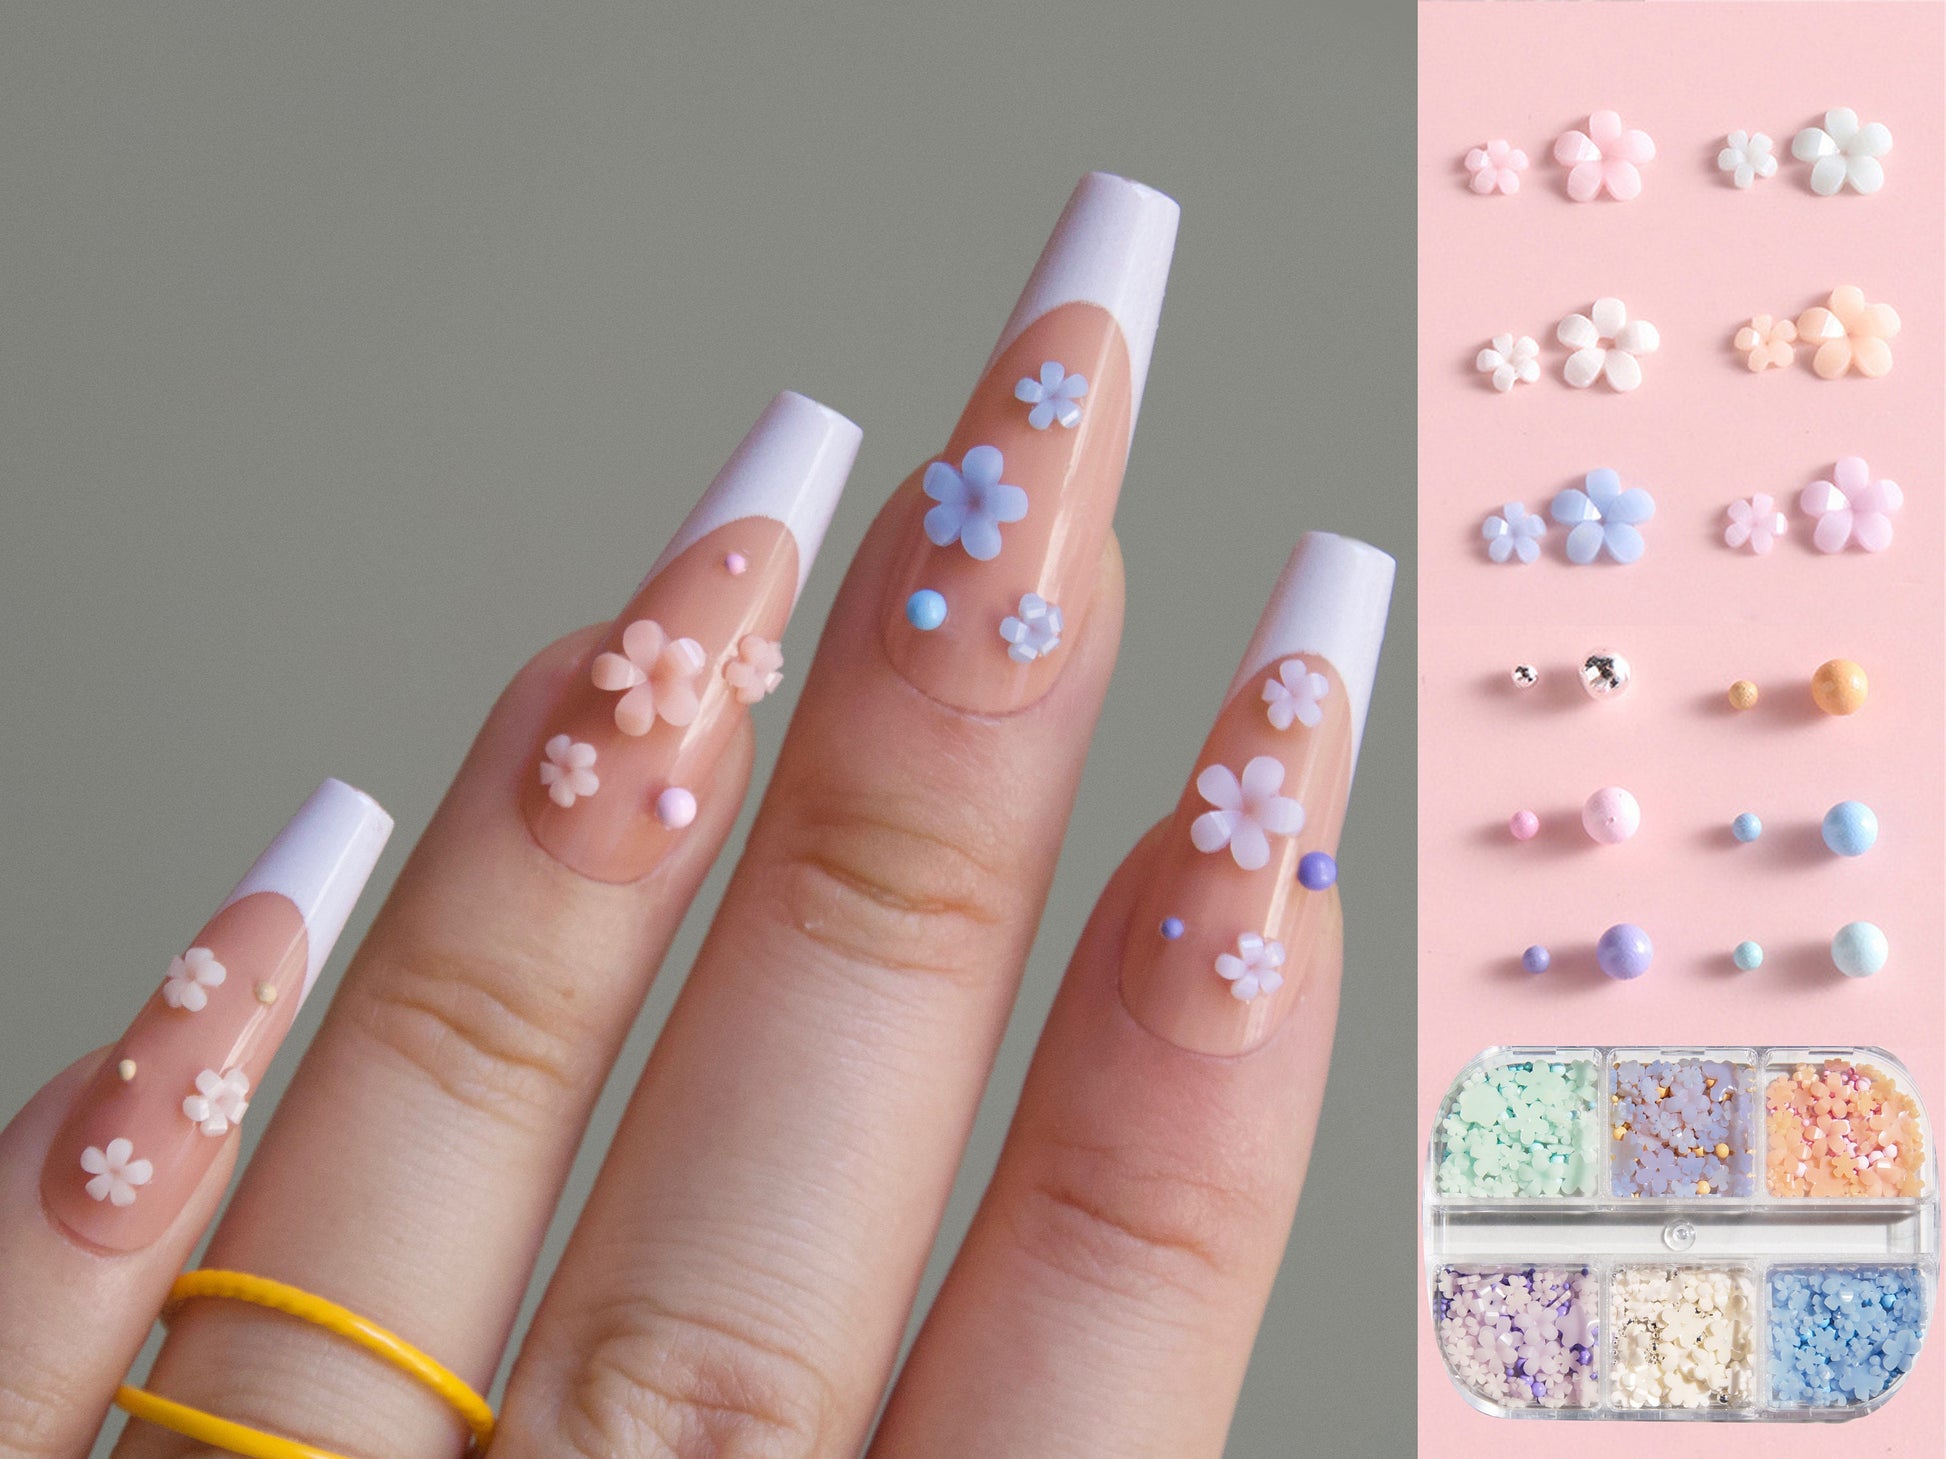 12 Girds Flower Nail Charms Nail Decals 3D Nail Charms for Acrylic Nails  Nail Accessories Color Cherry Blossom Floral Nail Charms Nail Decor Nail  Art